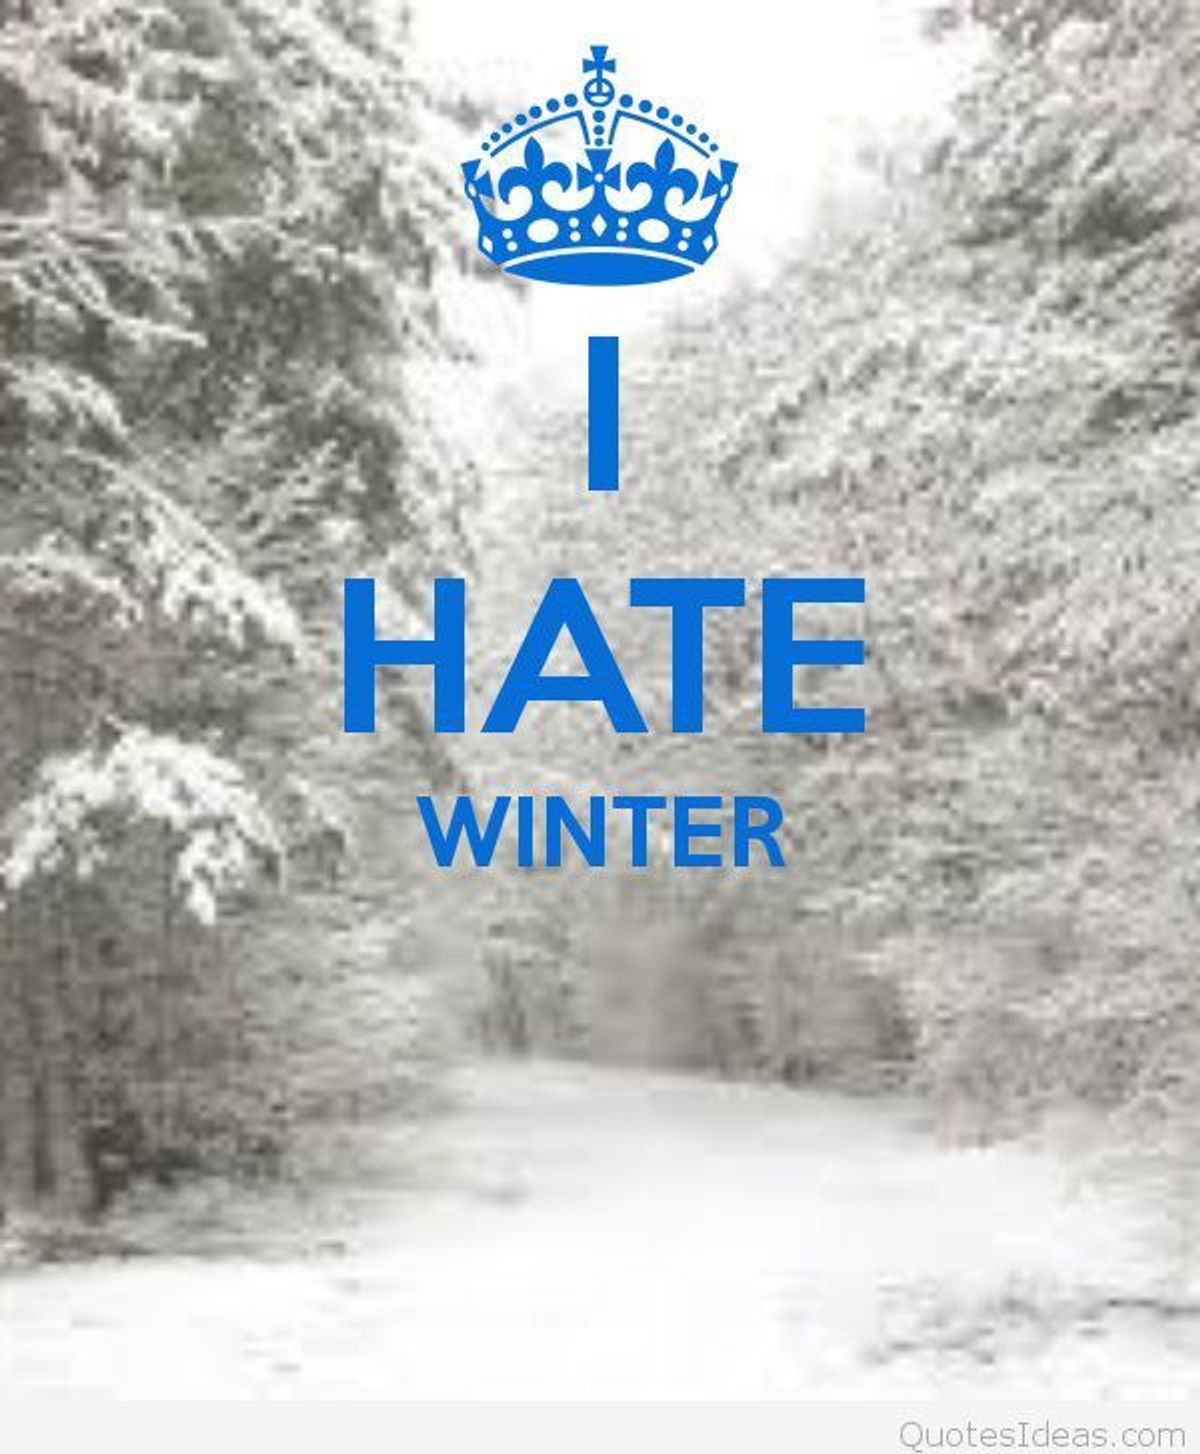 5 Things I Hate About Winter